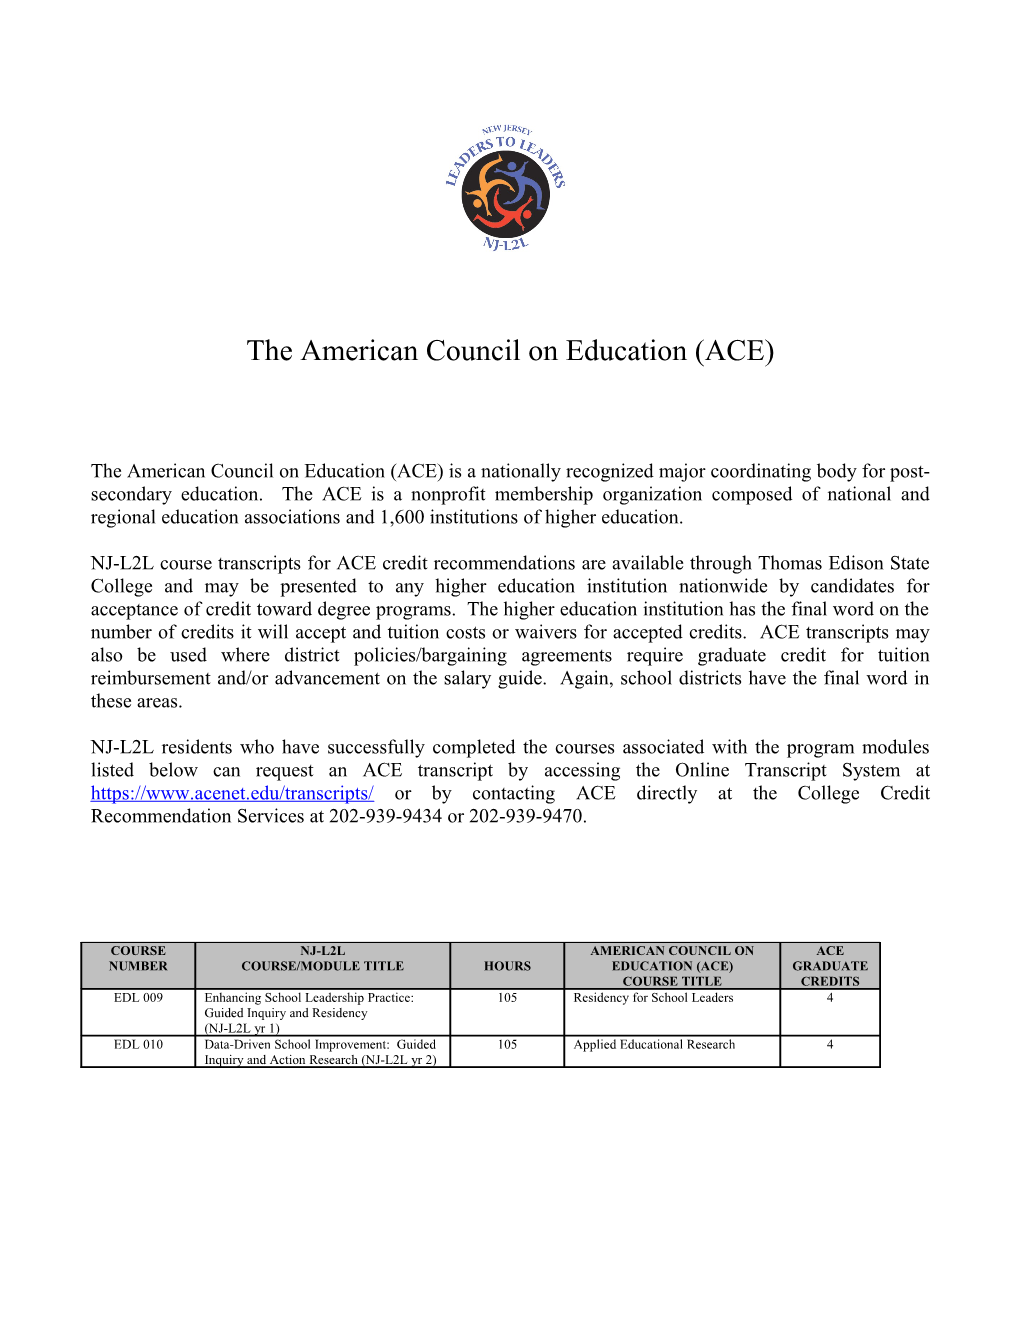 The American Council on Education (ACE) Is a Nationally Recognized Major Coordinating Body